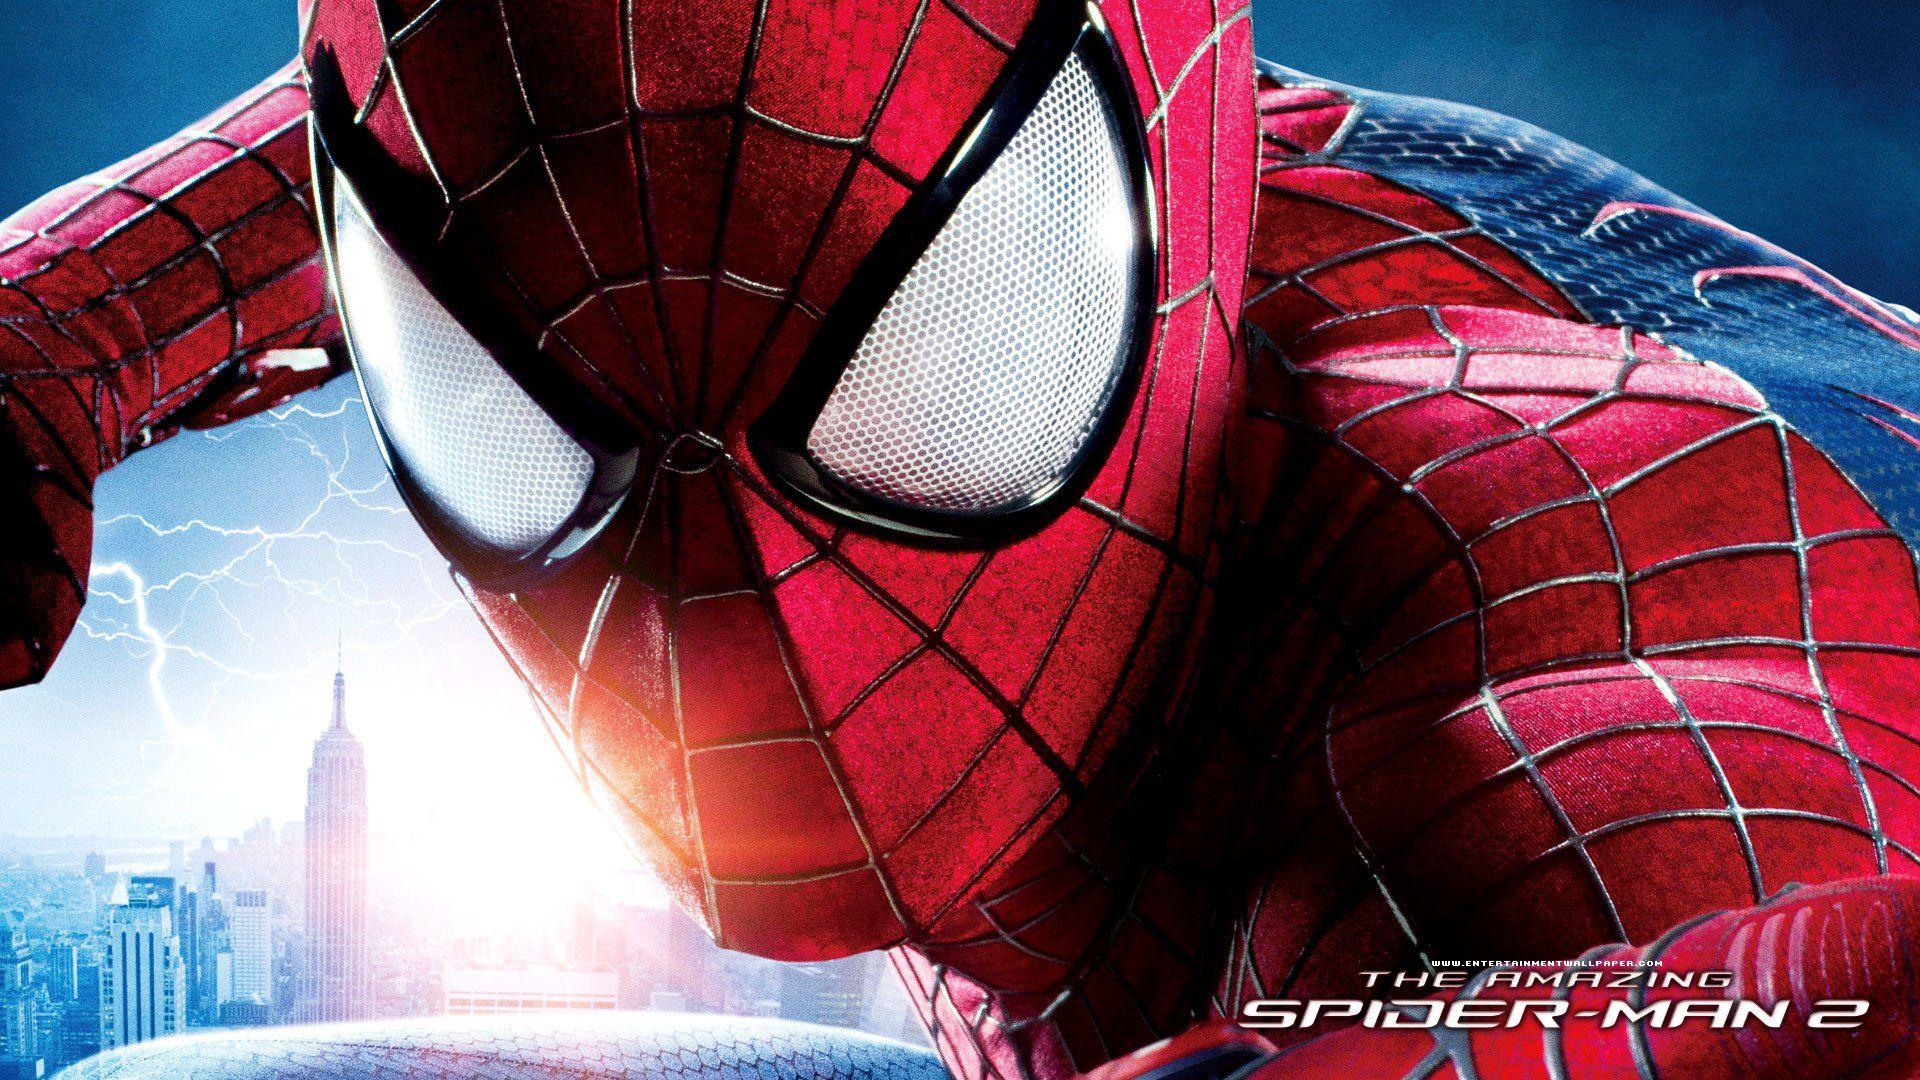 Picture In High Quality: Spider Man 2 by Hunter Carmean, March 29